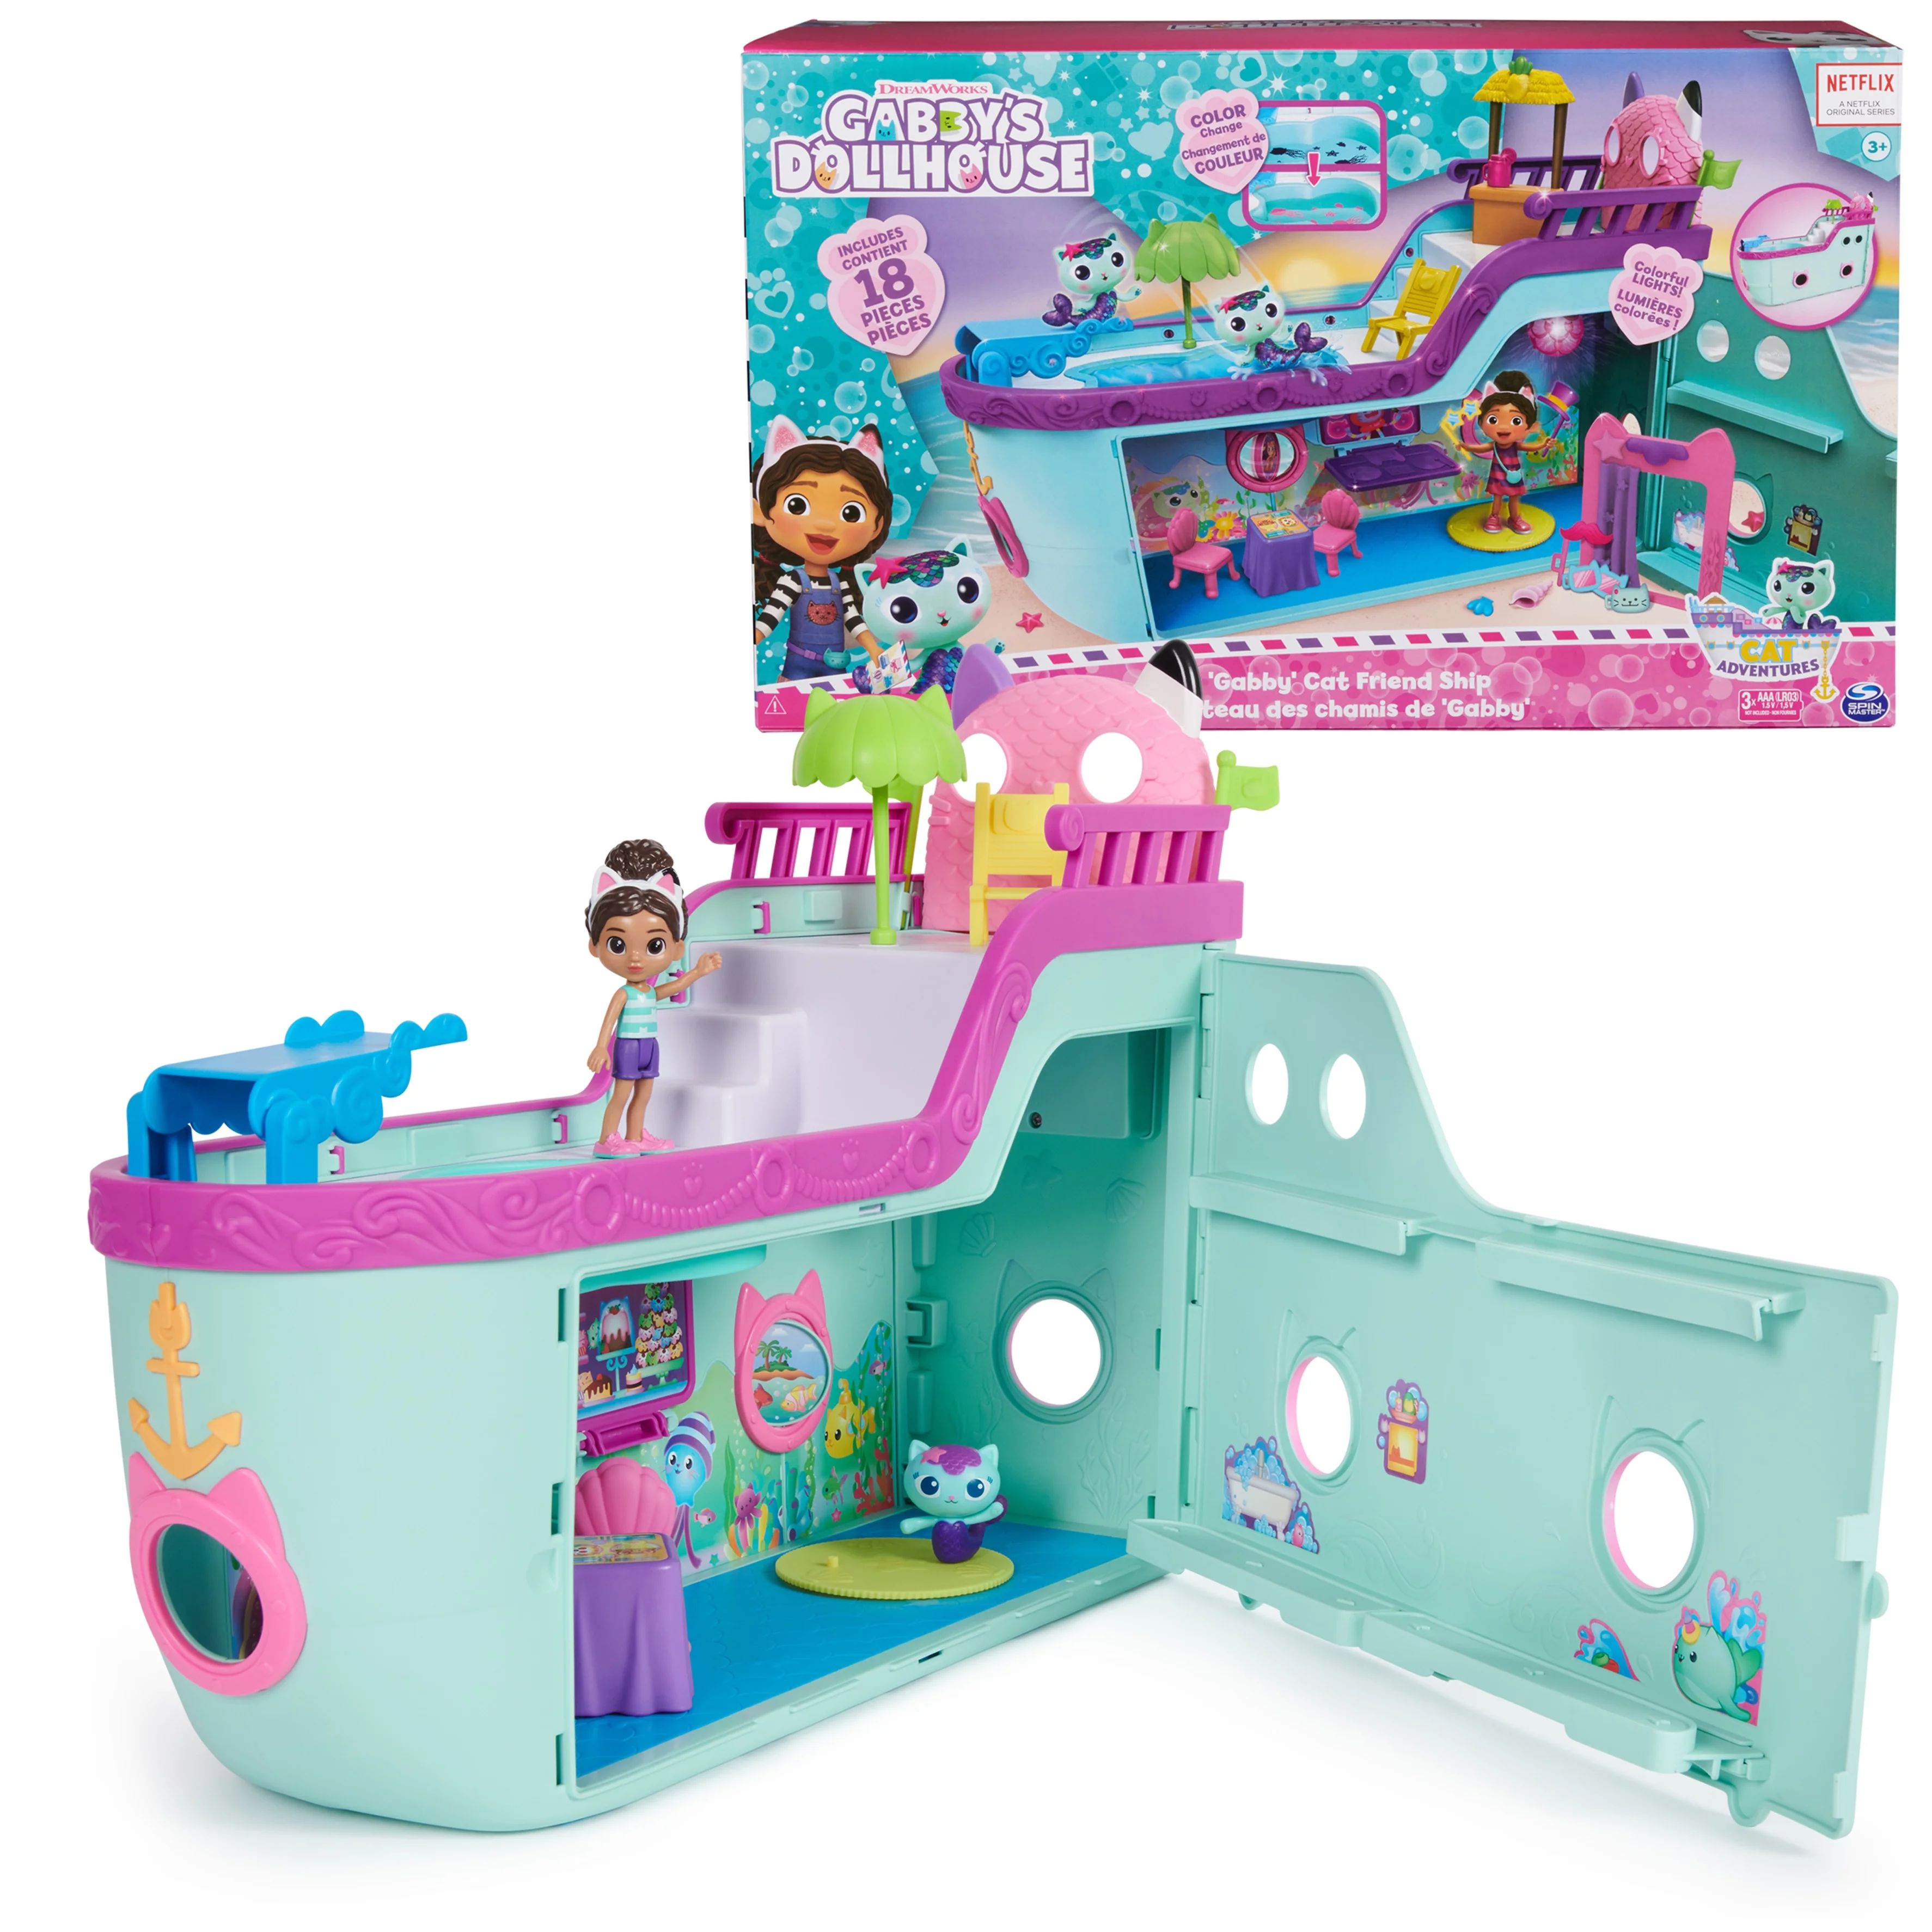 Gabby’s Dollhouse, Gabby Cat Friend Ship Cruise Ship Toy Vehicle Playset, for Kids age 3 and up... | Walmart (US)